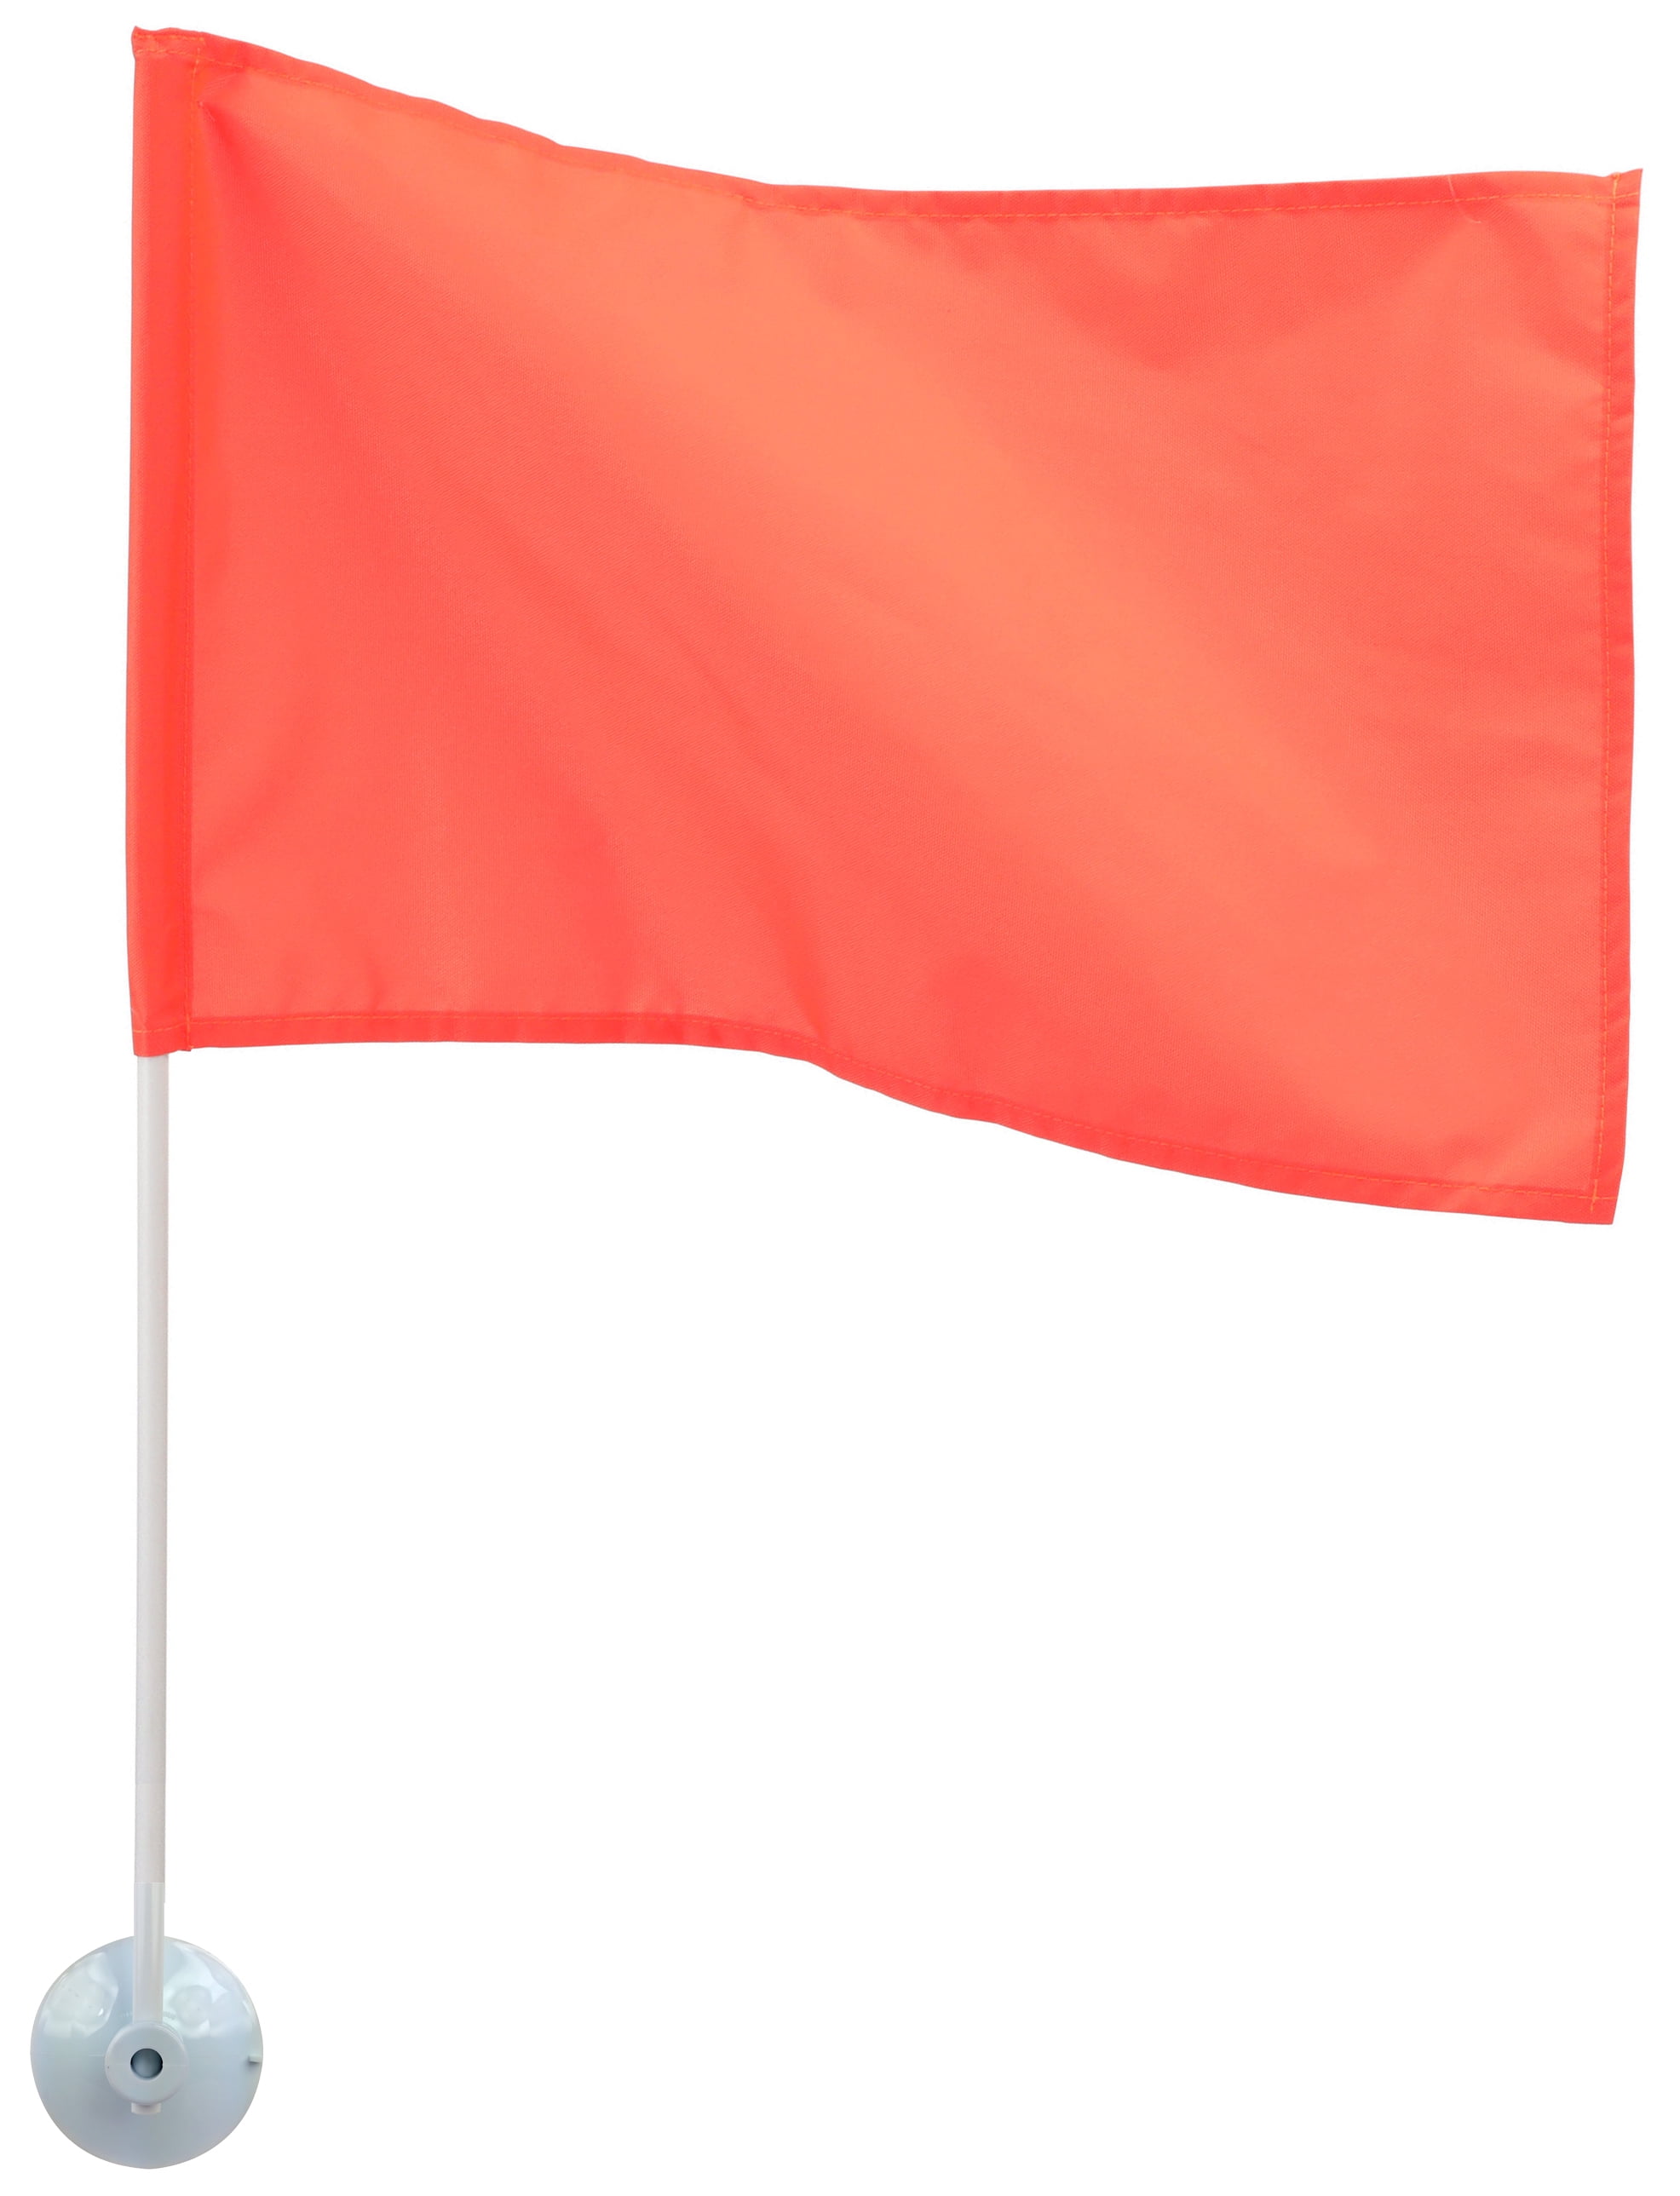 Orange Color Hand Held Safety Flag 24 inch by 24 inch Solid Material 